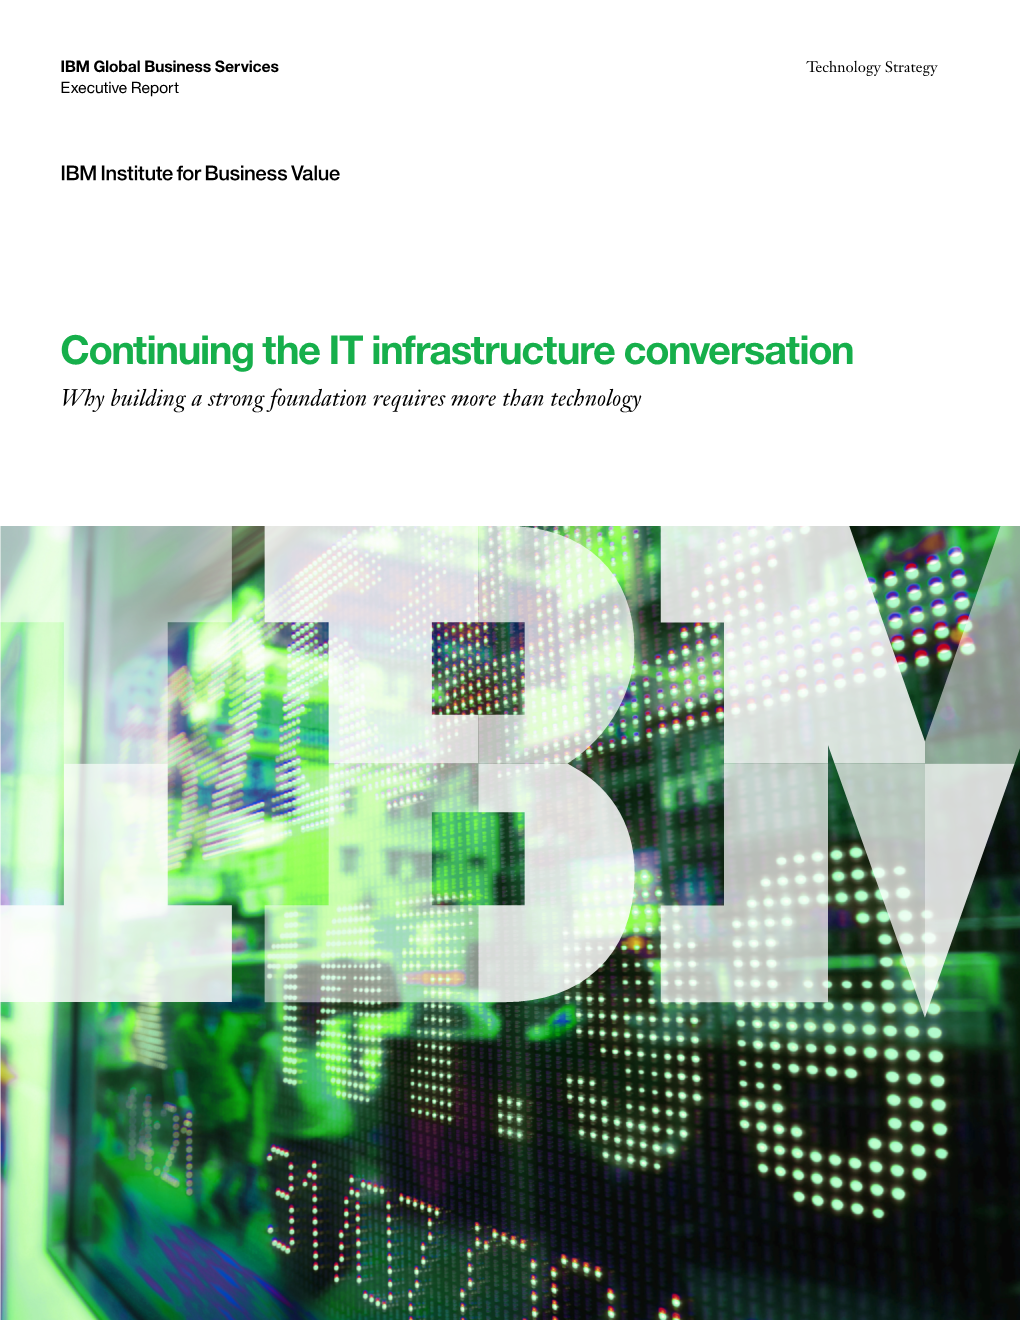 Continuing the IT Infrastructure Conversation